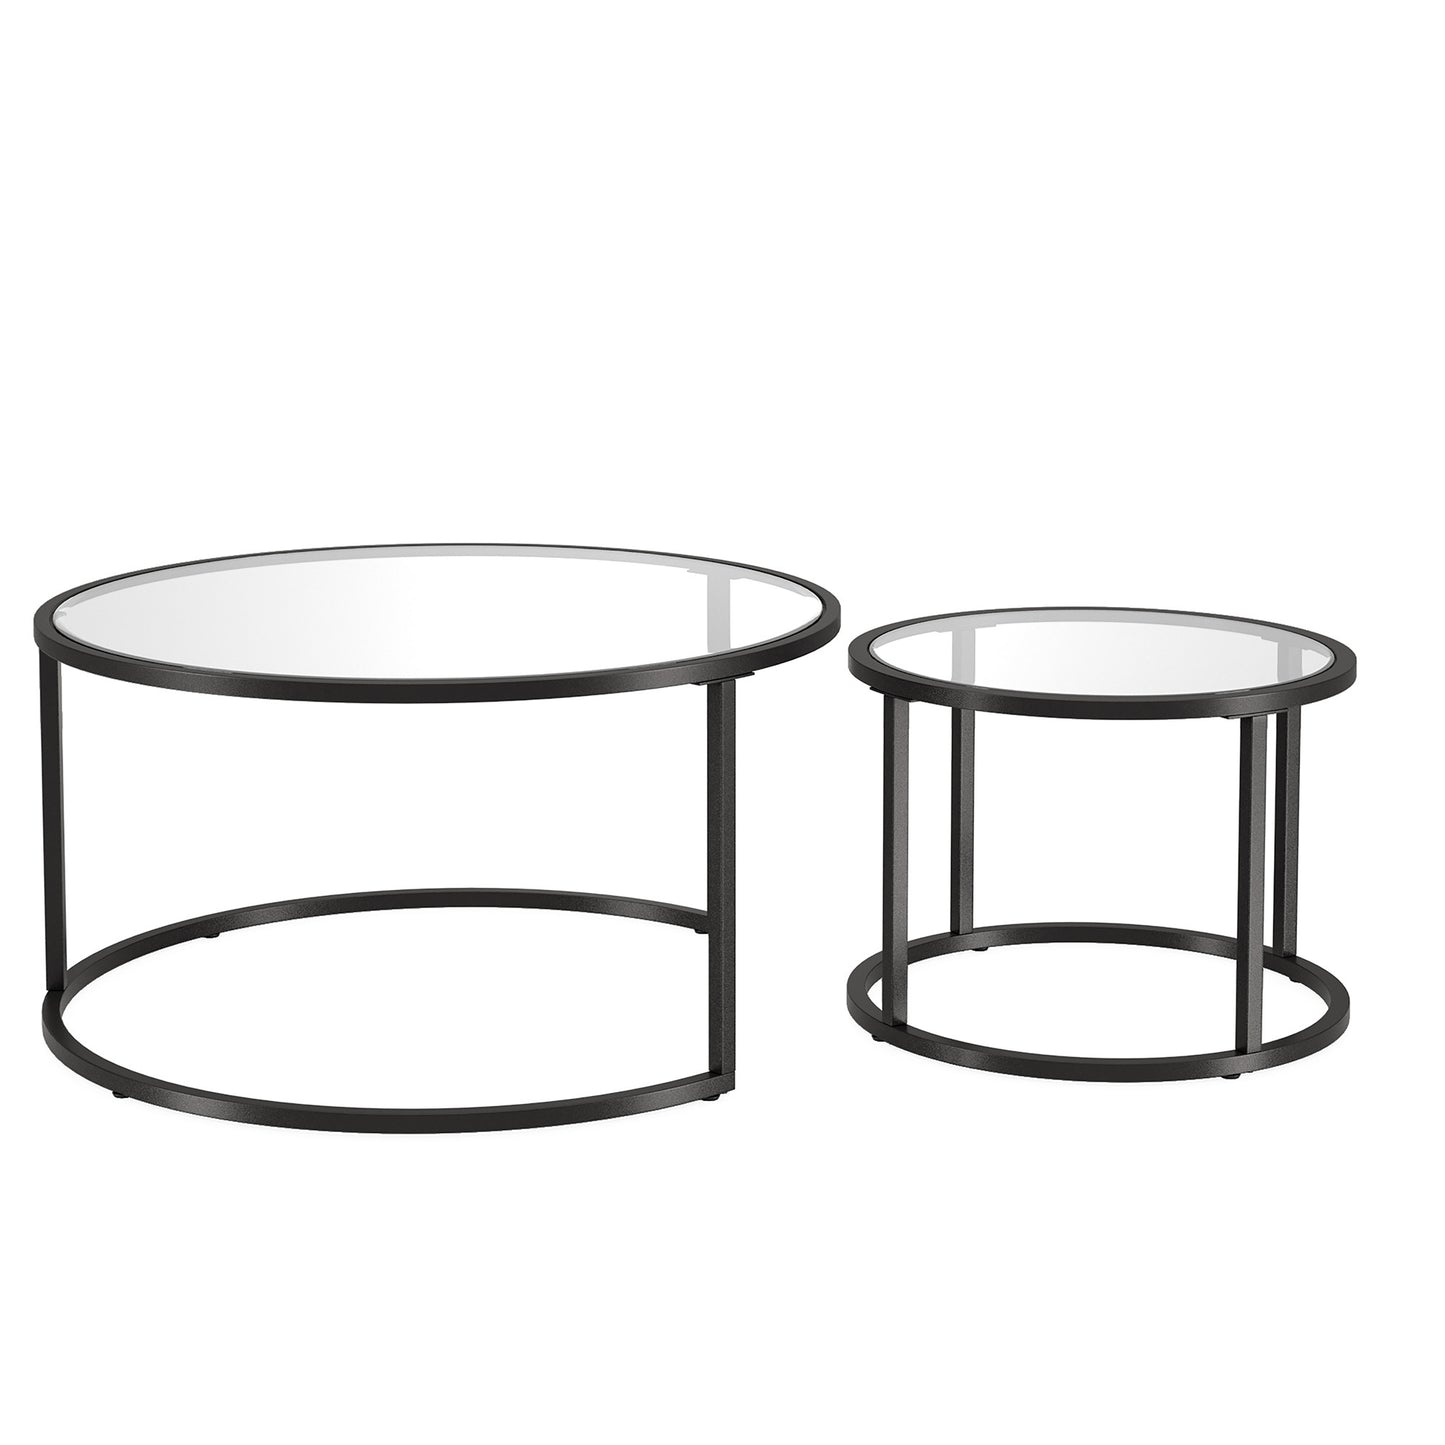 Set of Two 35" Black Glass And Steel Round Nested Coffee Tables